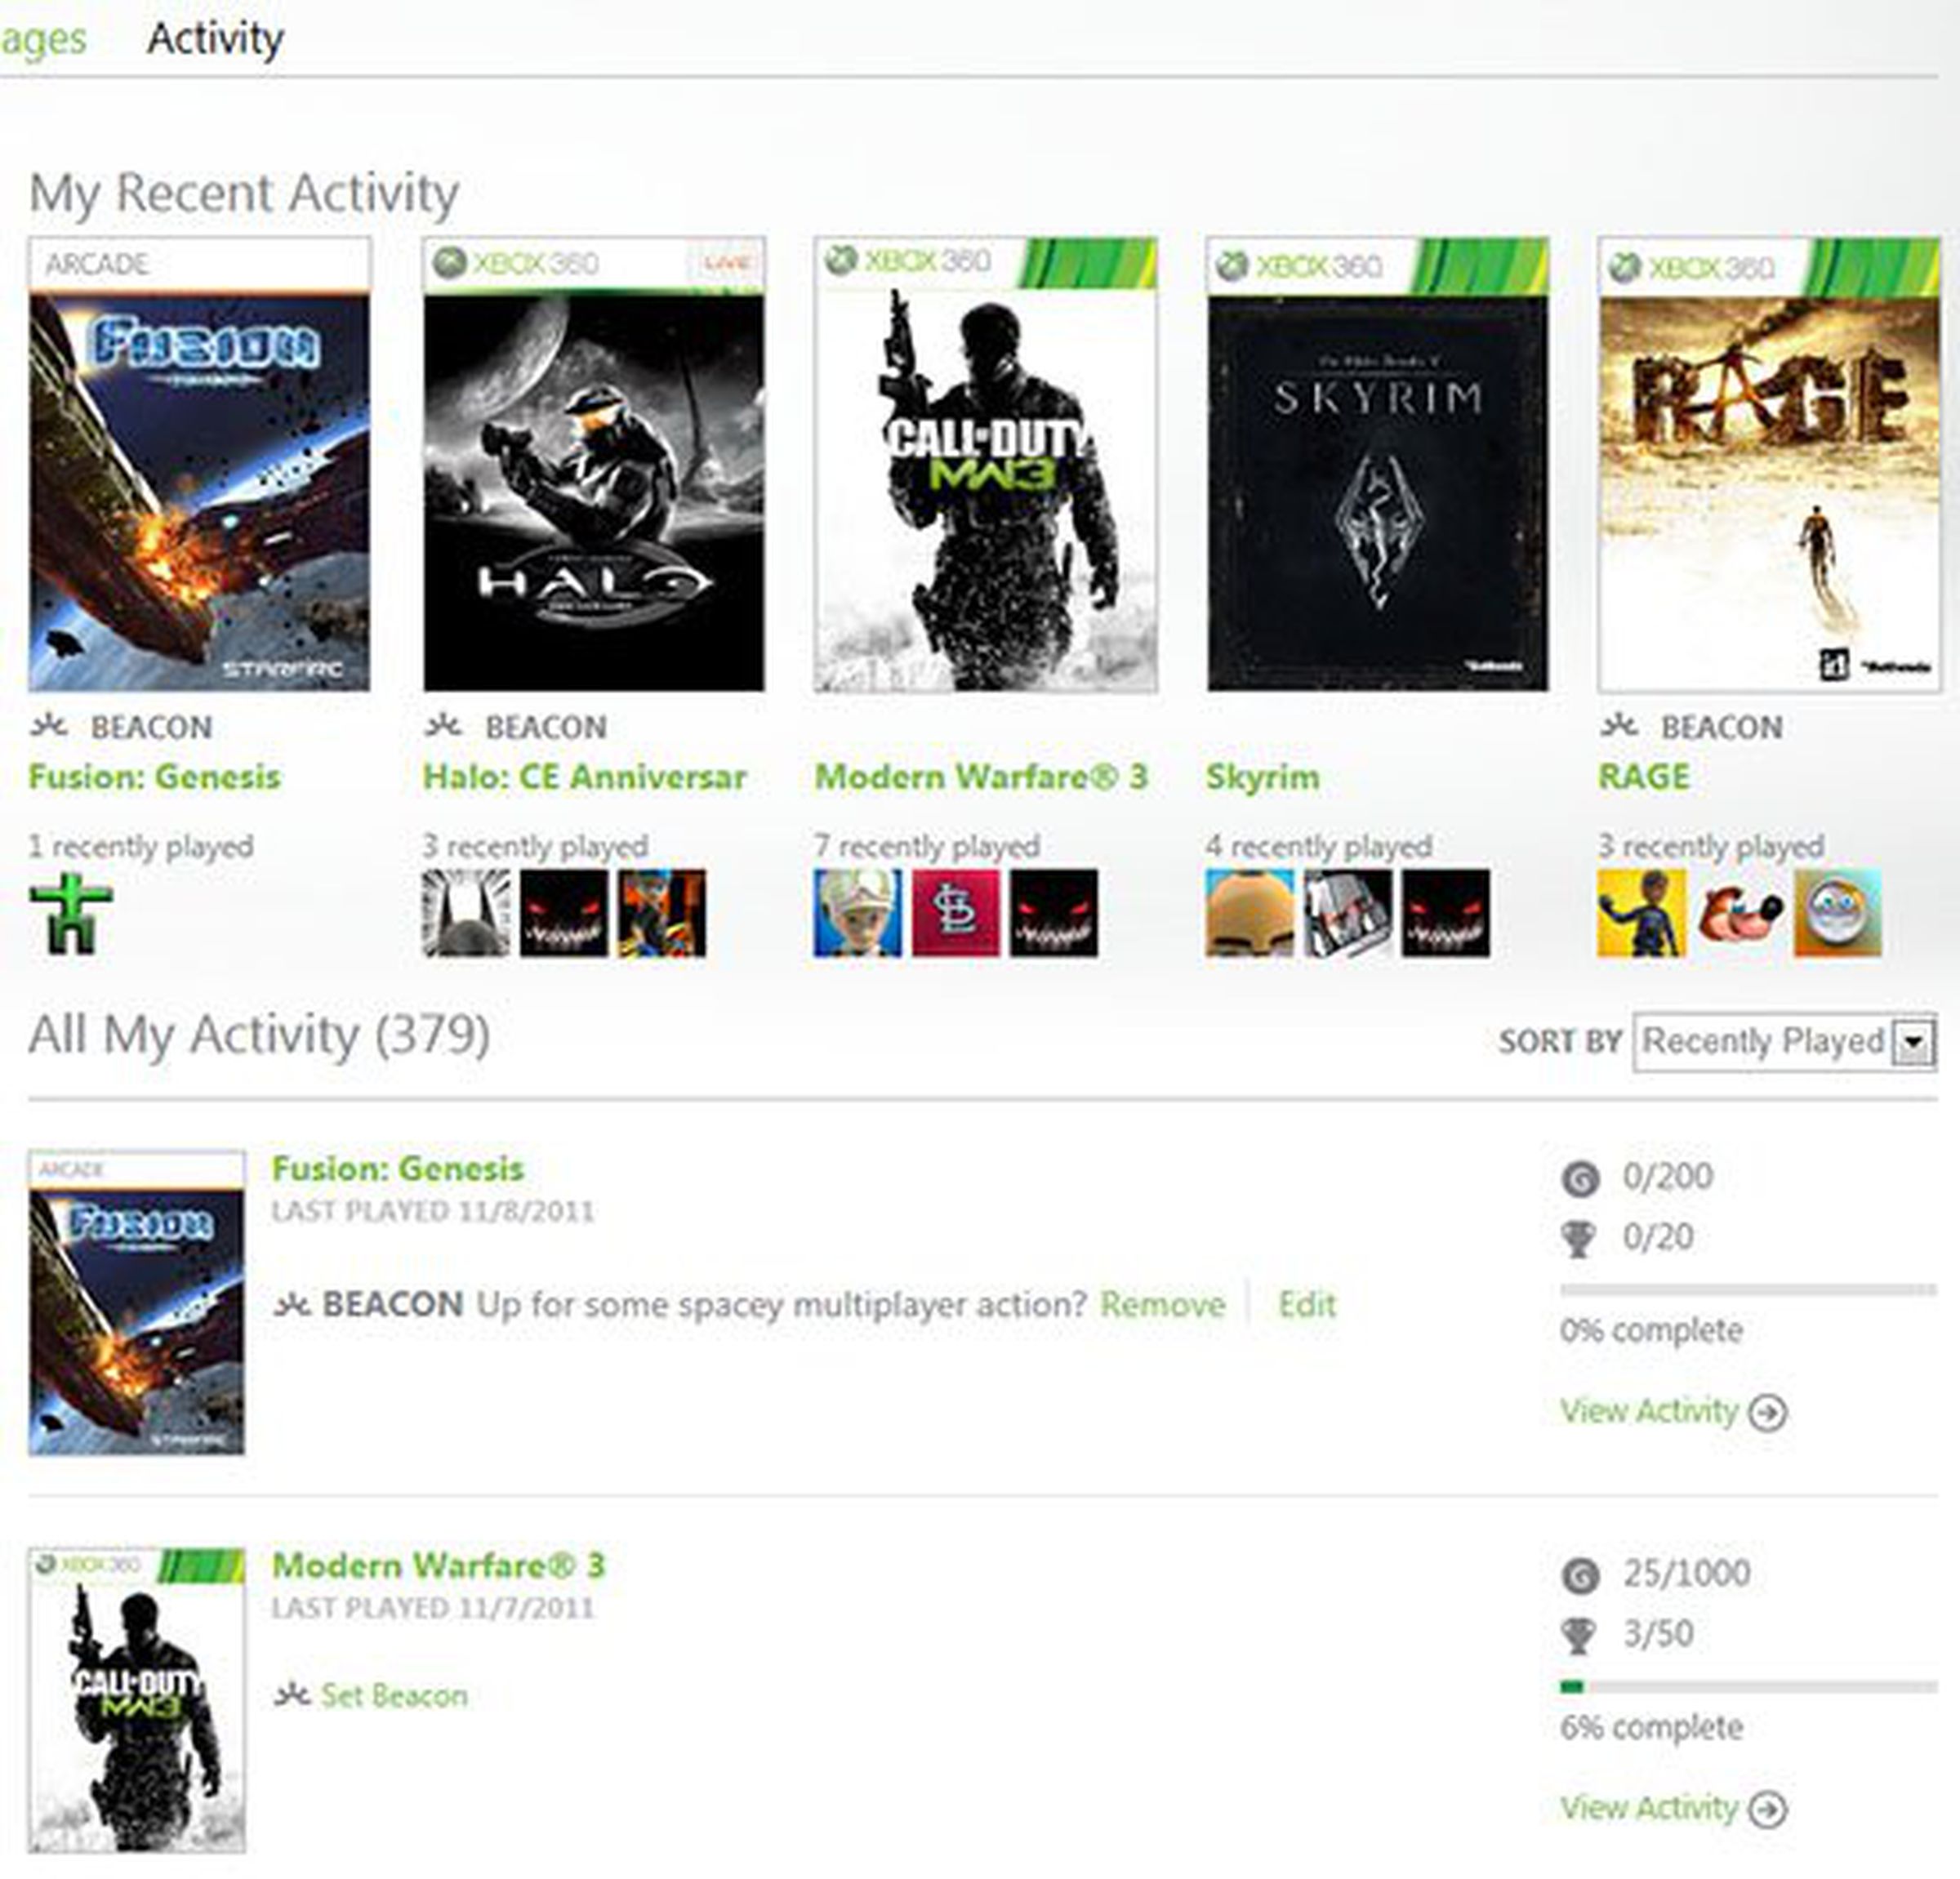 Xbox.com 'Social' revamp in pictures